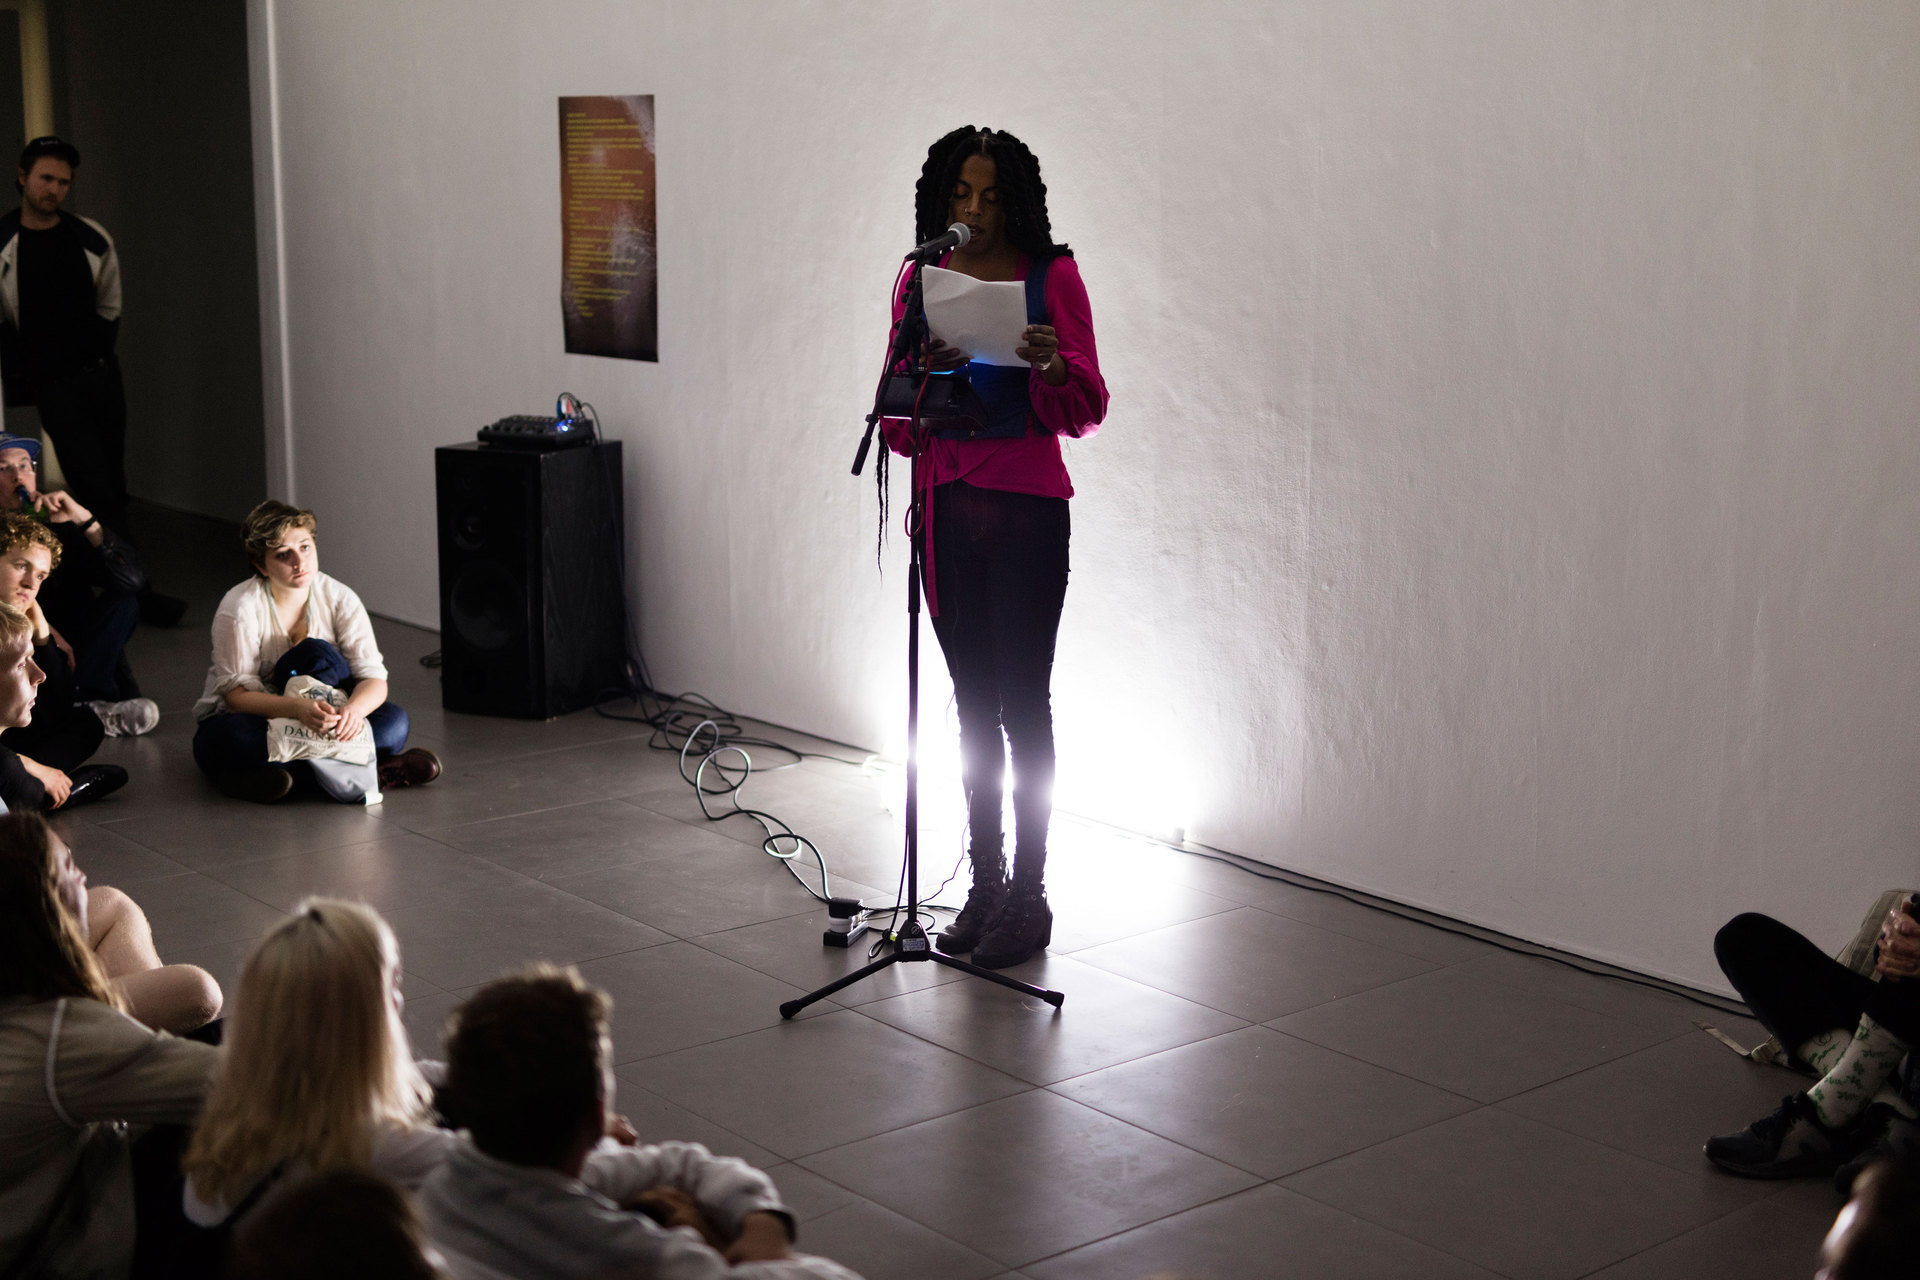 Juliana Huxtable reading, part of "Reading Pleasure" event, Cell Project Space, 2017